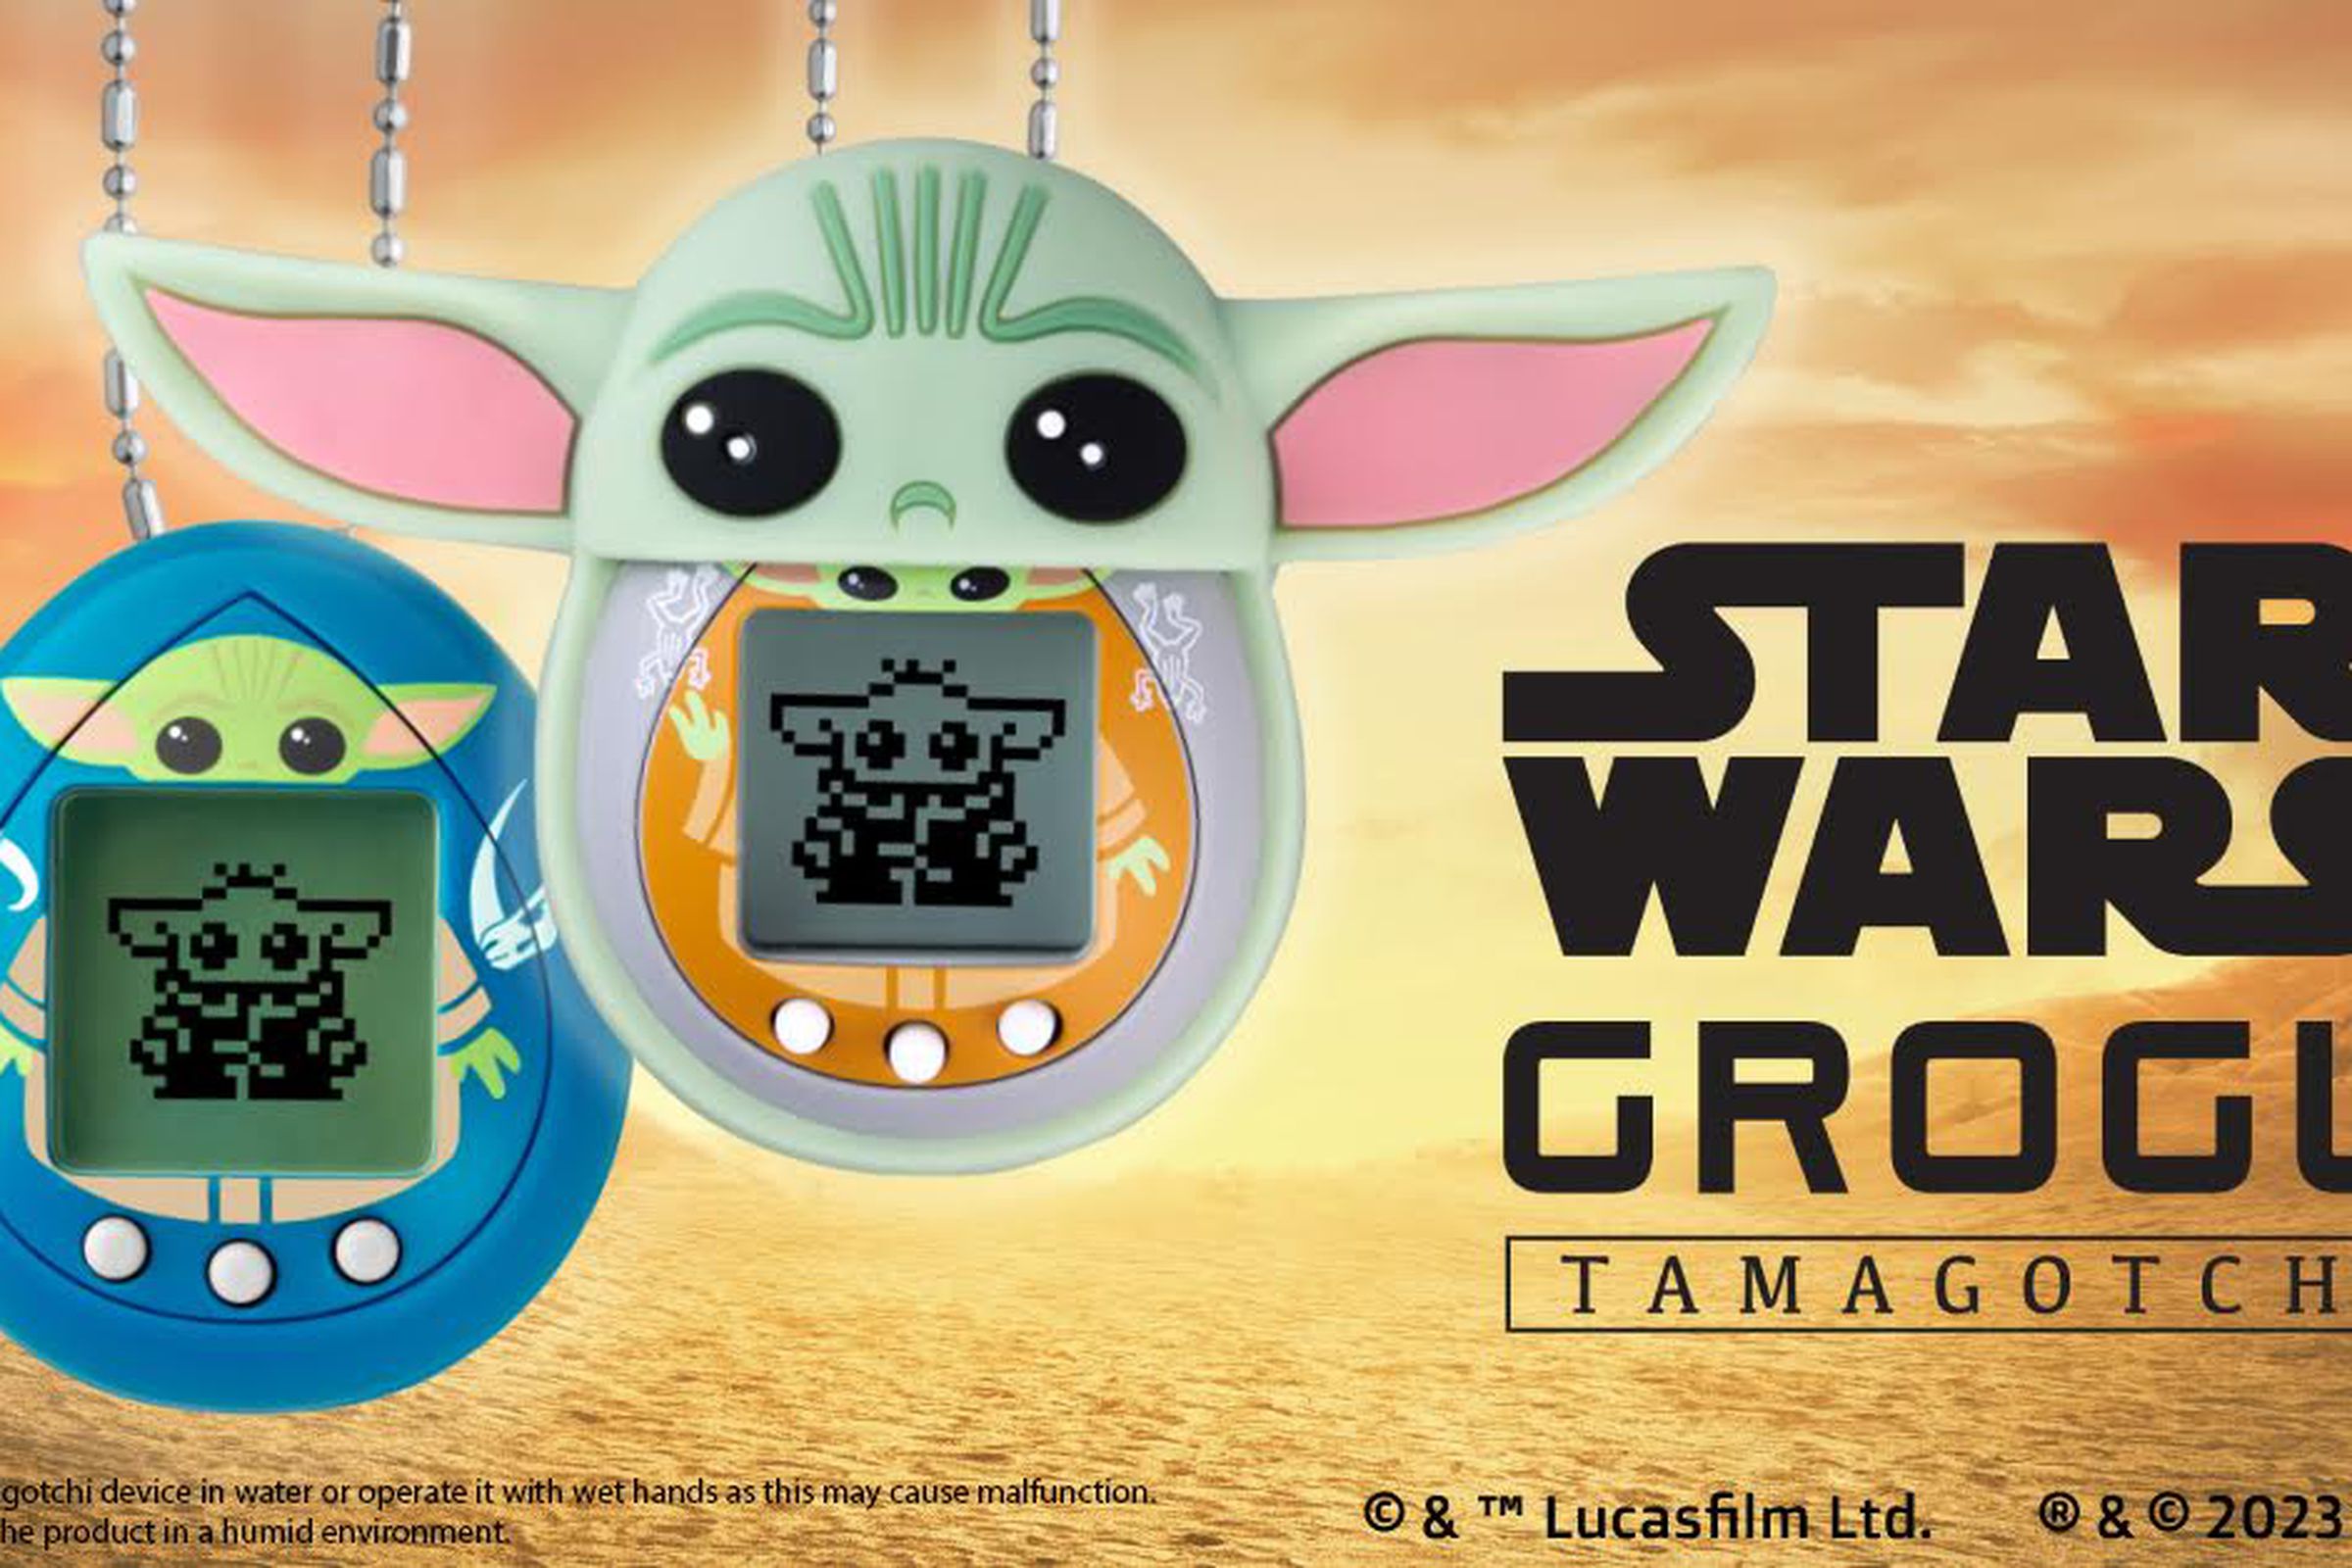 A photo of two different versions of the Grogu-themed Tamagotchi.